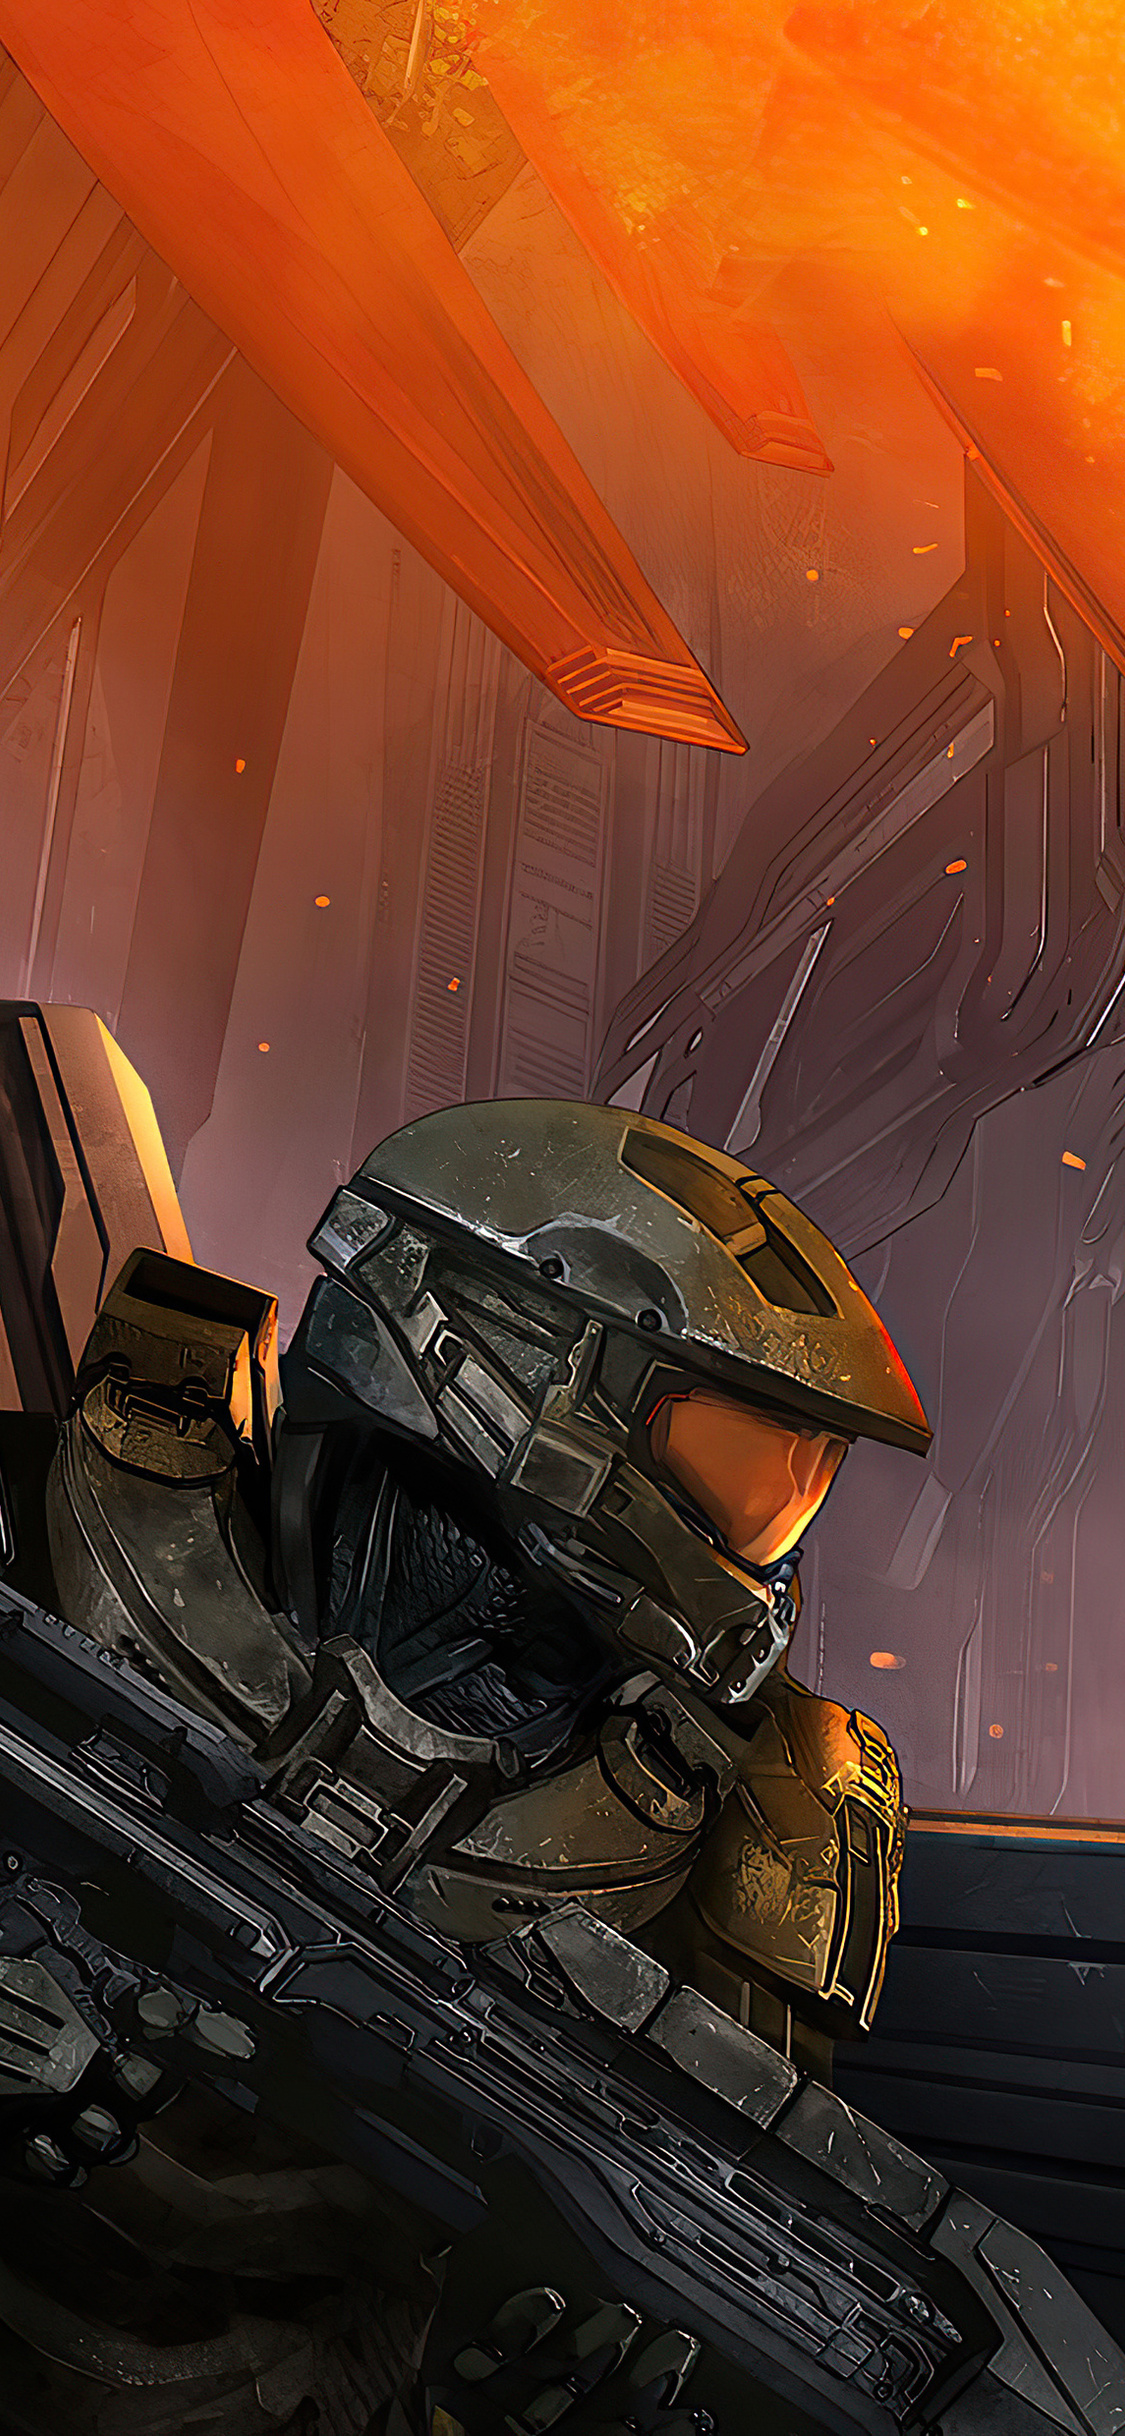 Looking for neat Halo wallpapers for the iPhone XS Max 1242x2688 Anyone  have some they wanna share  rhalo